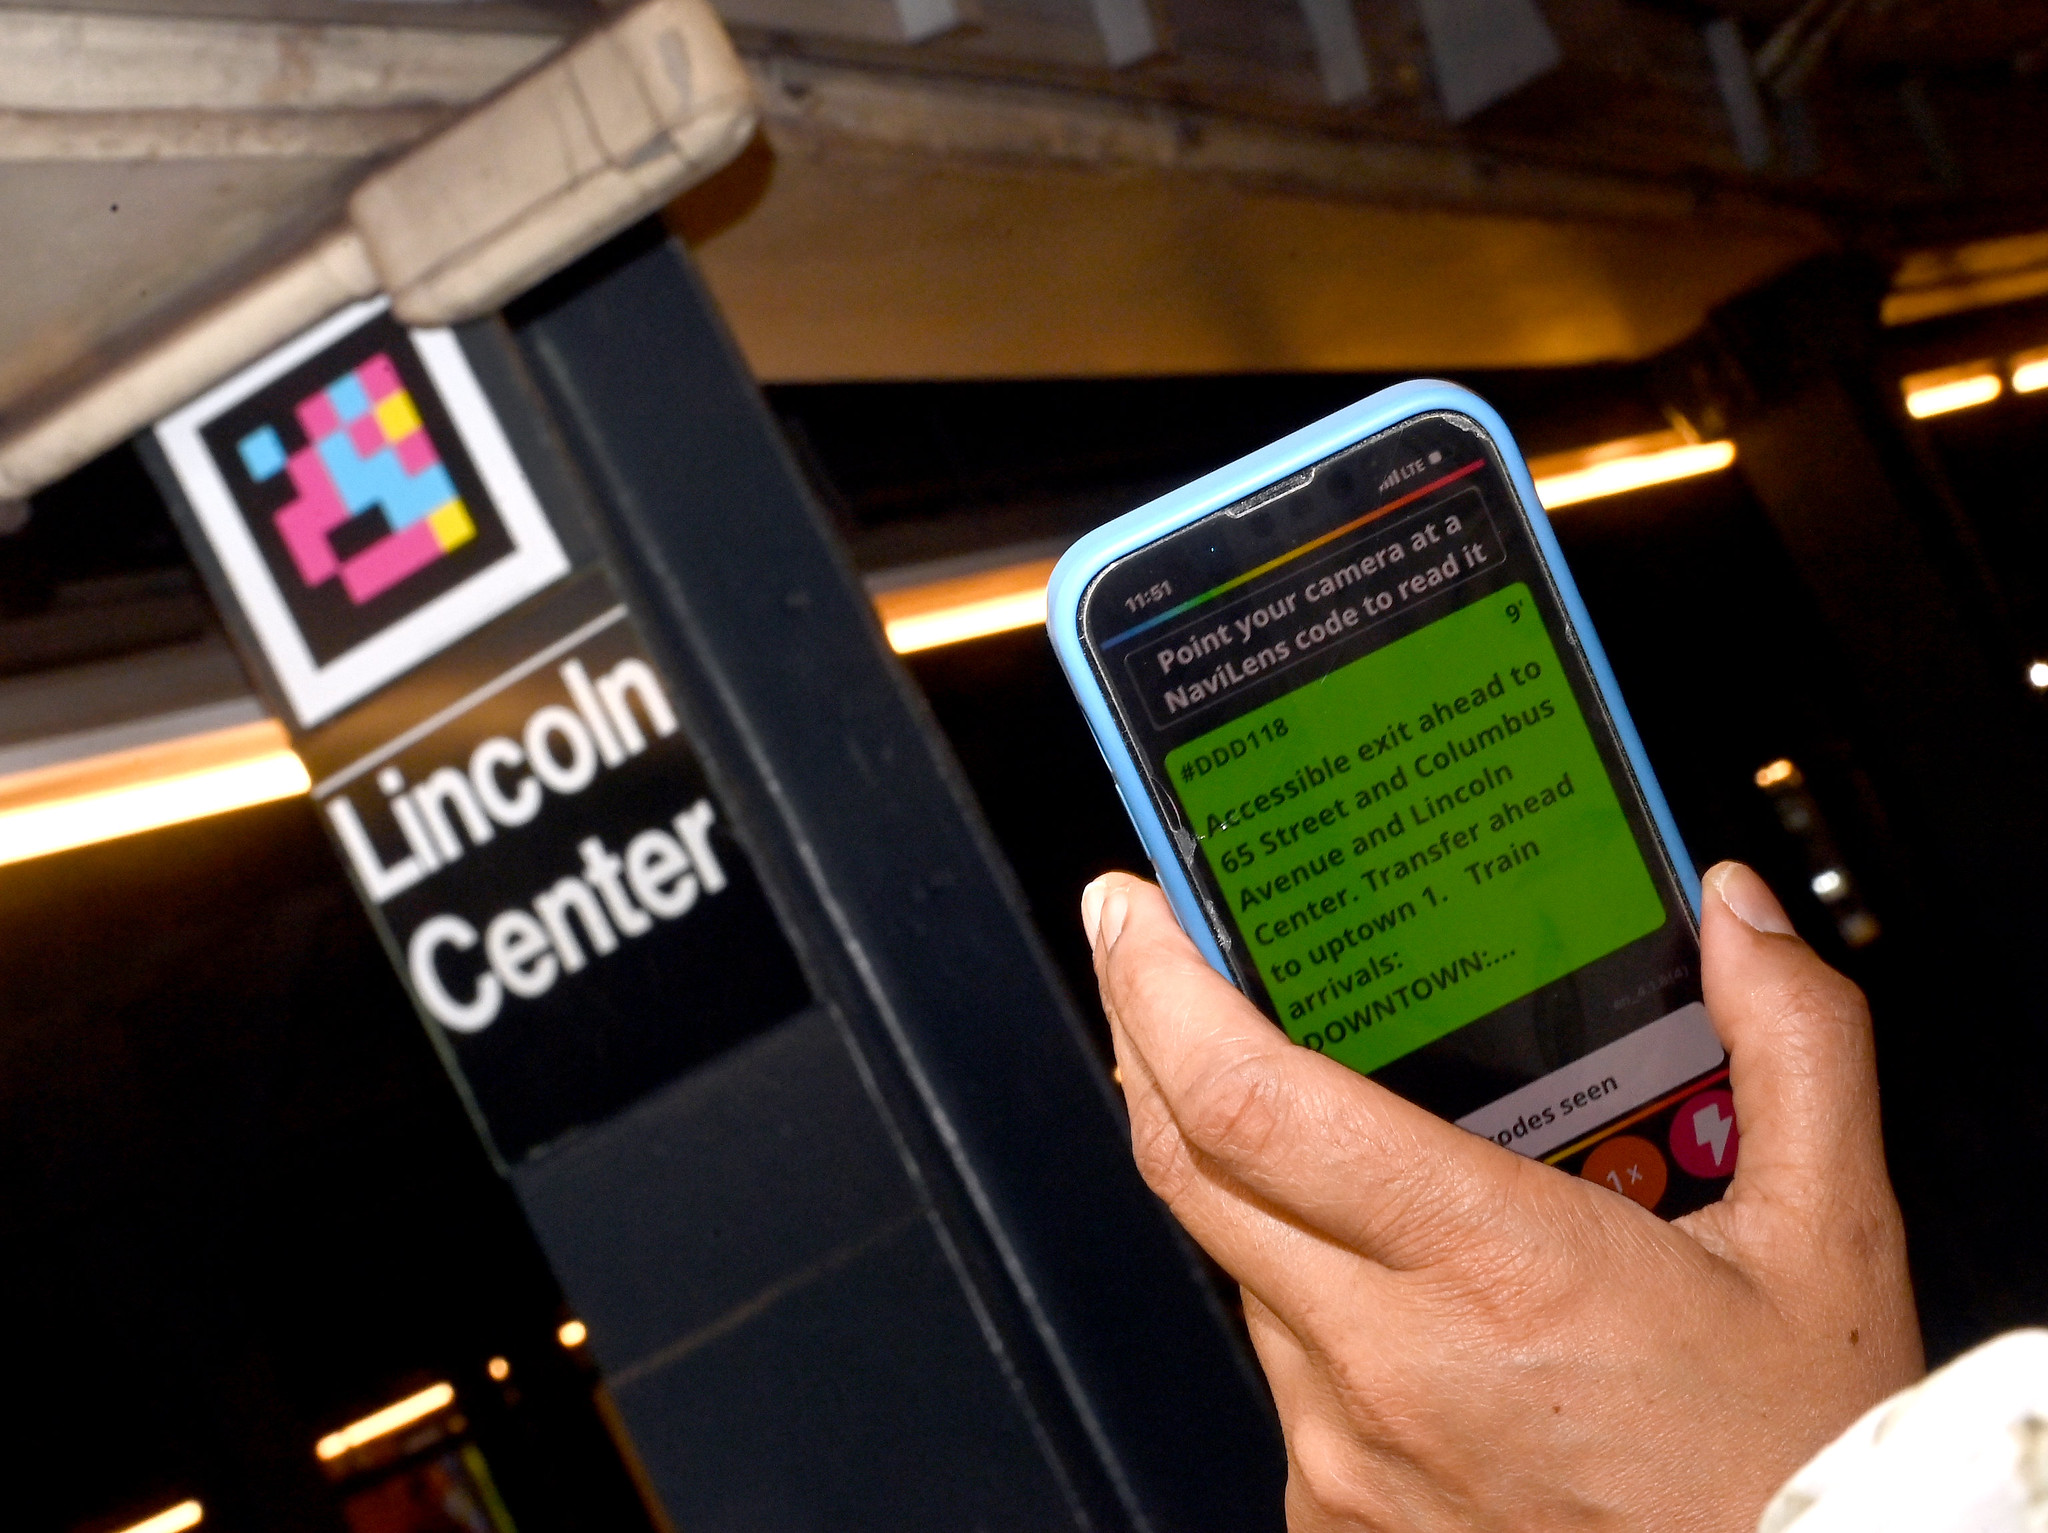 Cell phone shows Navilens wayfinding instructions with accessibility QR code visible in background above Lincoln Center sign.